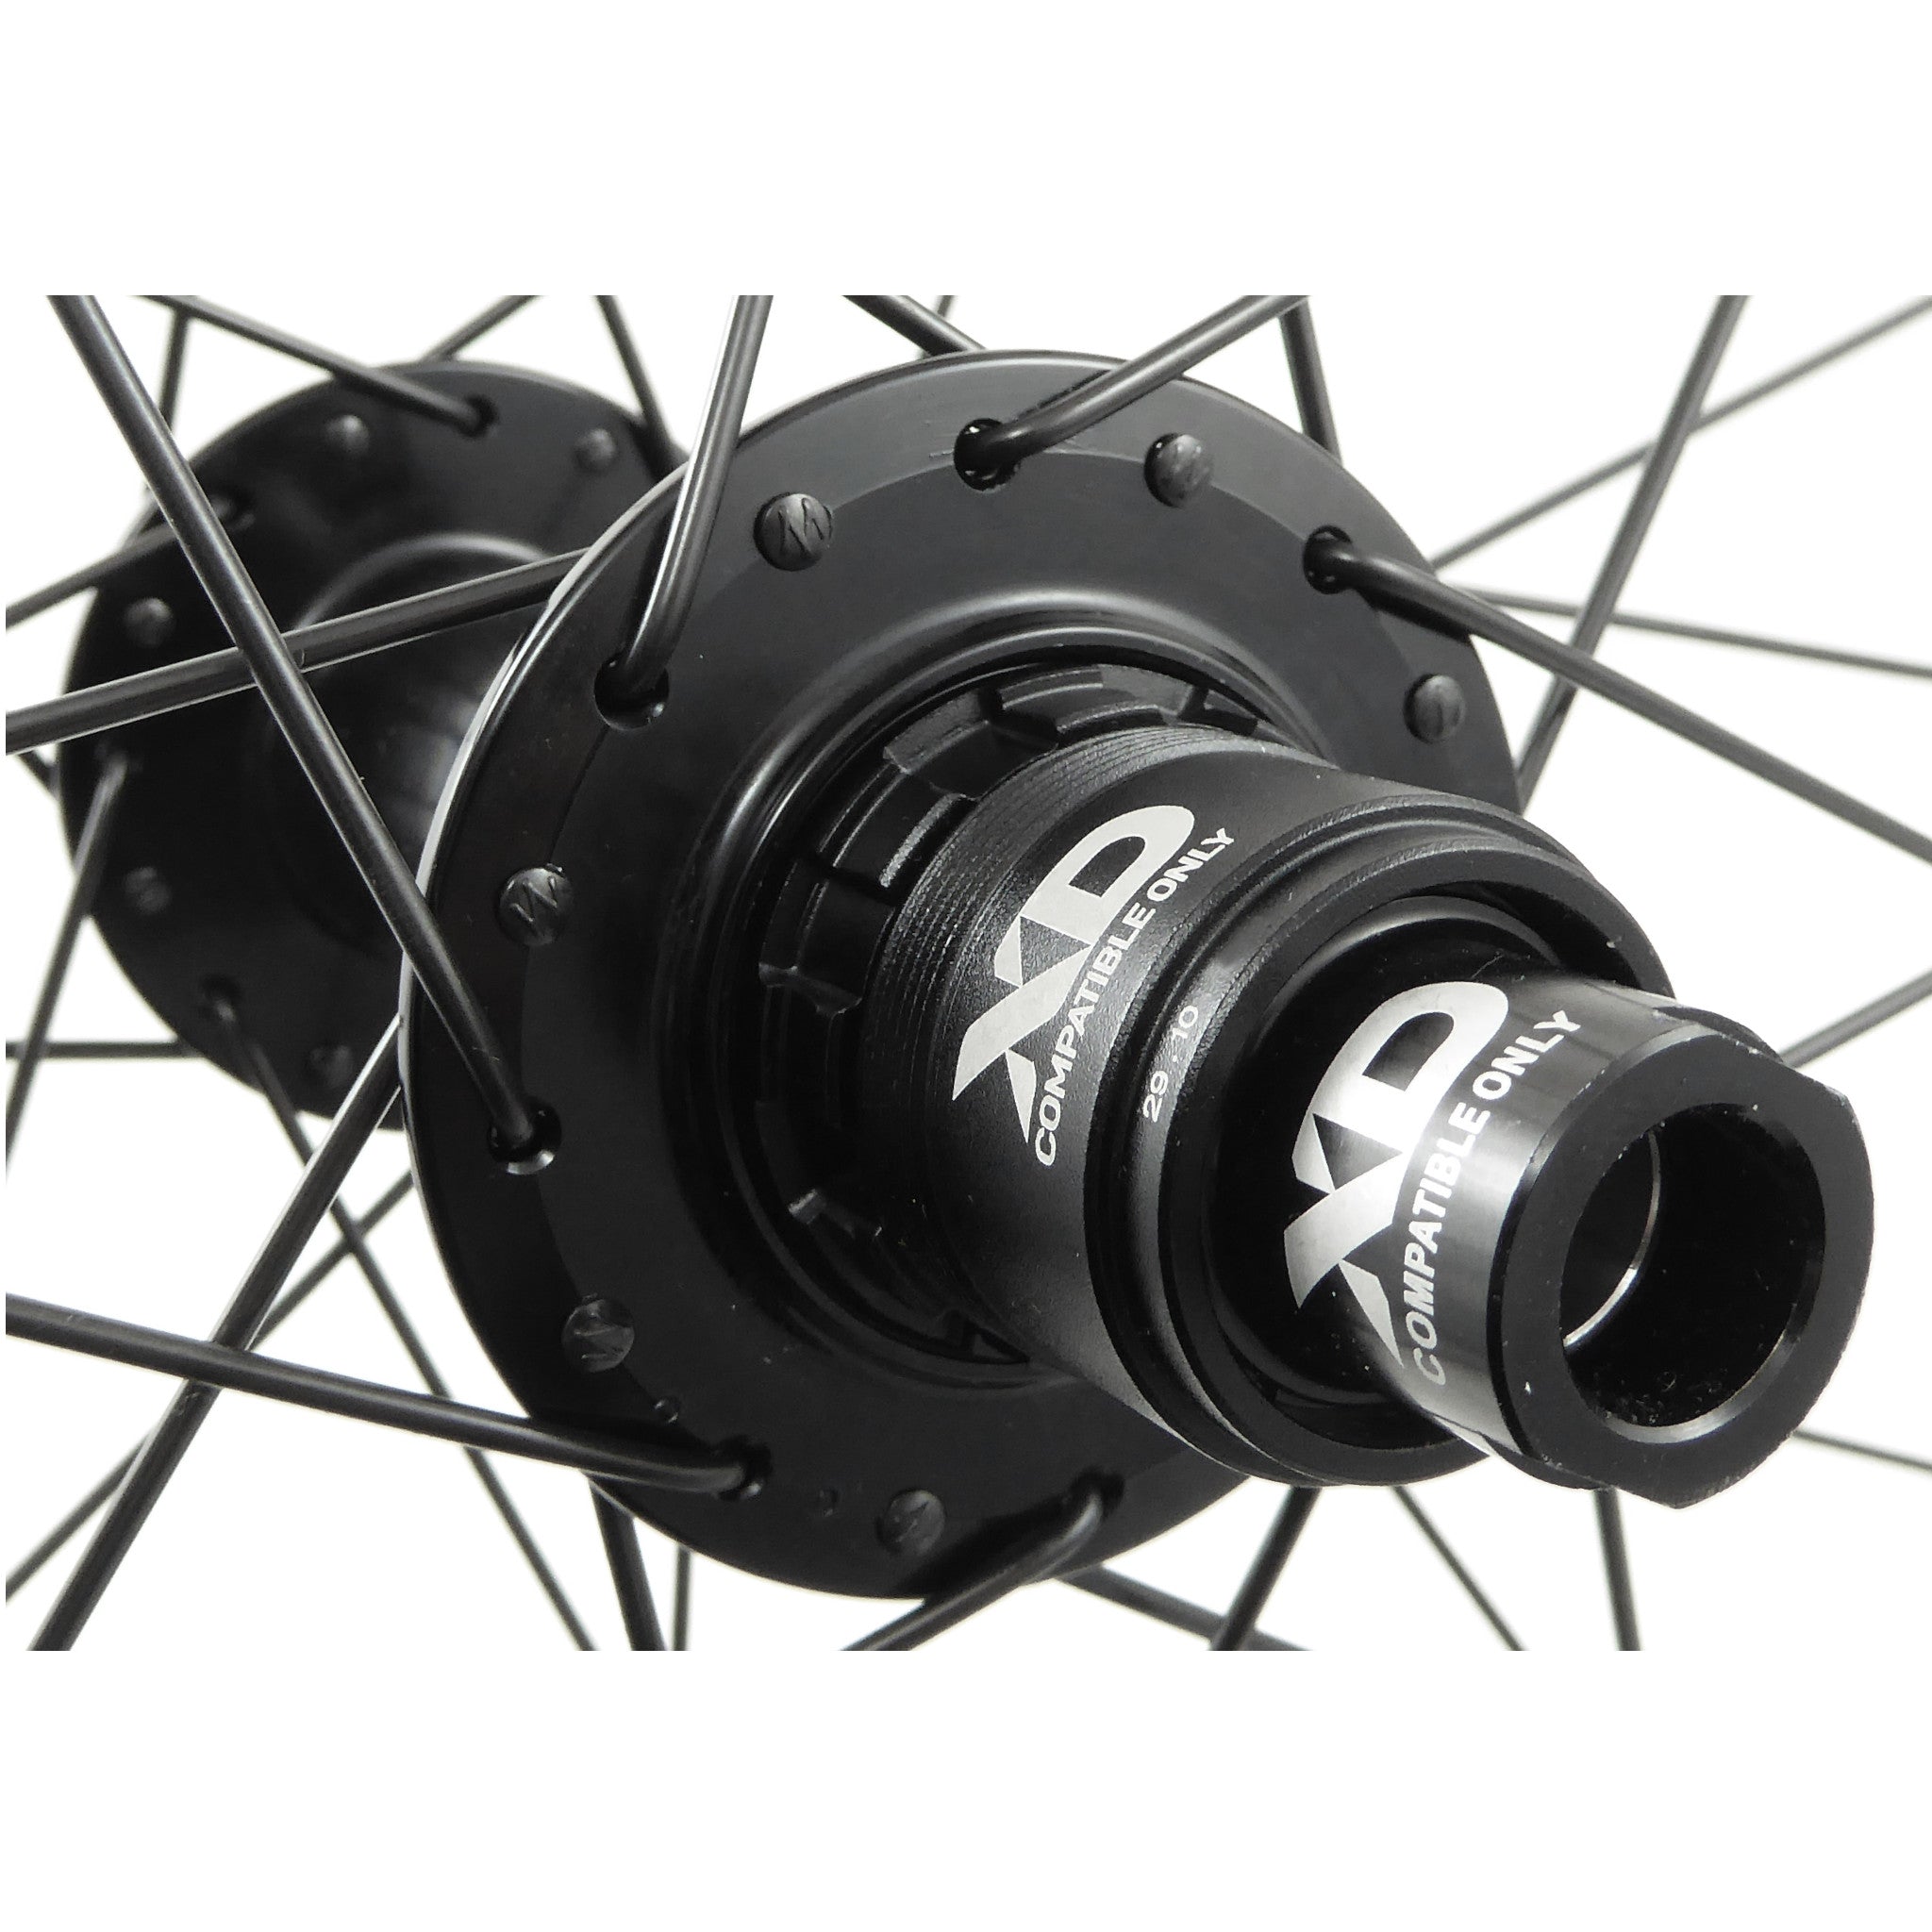 A closeup of the rear hub with an XD Driver type hub.